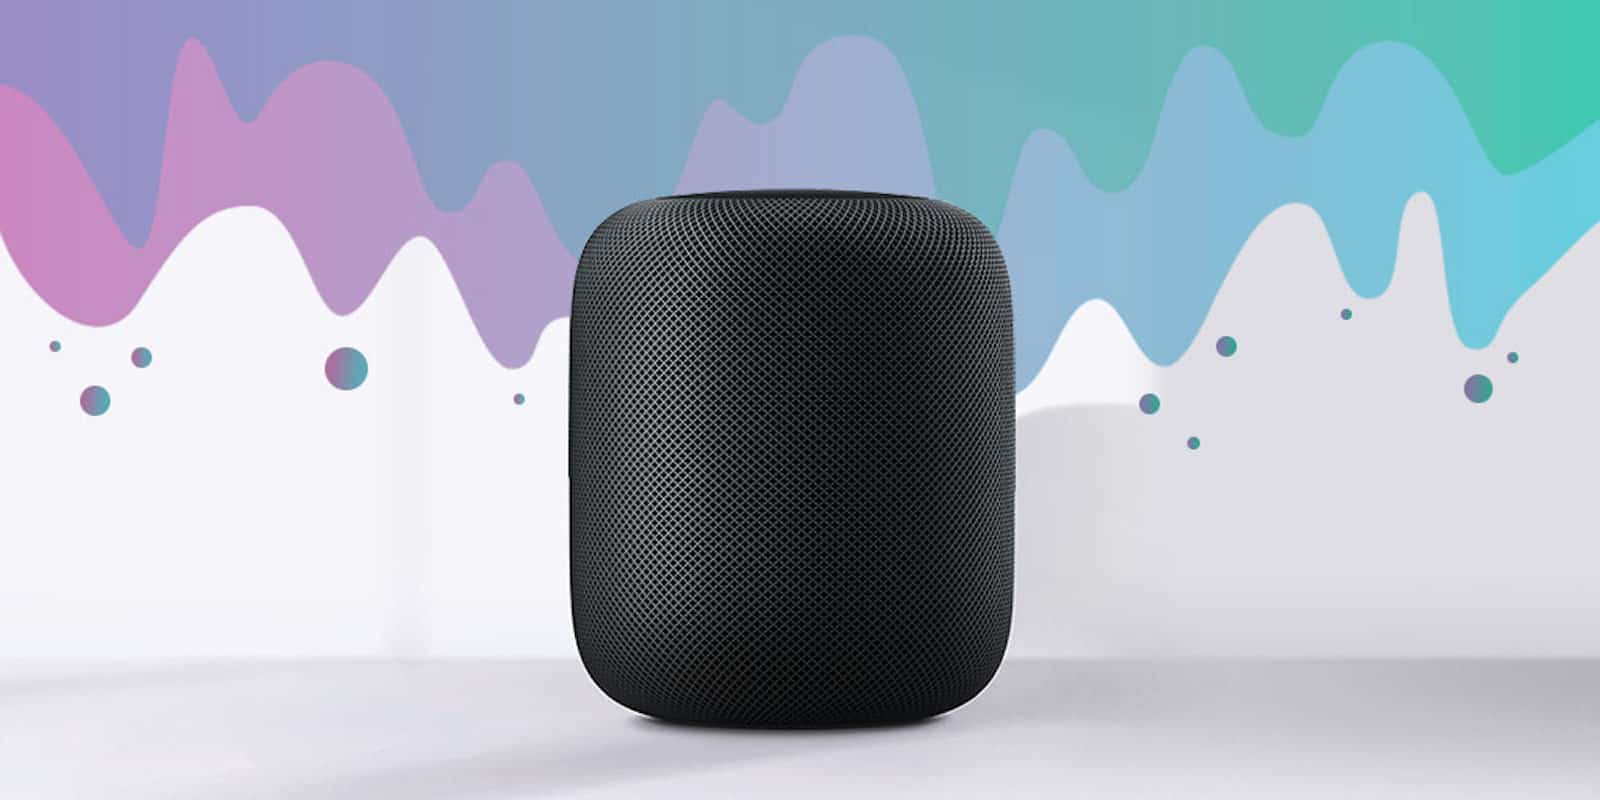 We can finally announce the lucky winner of our Apple HomePod giveaway.